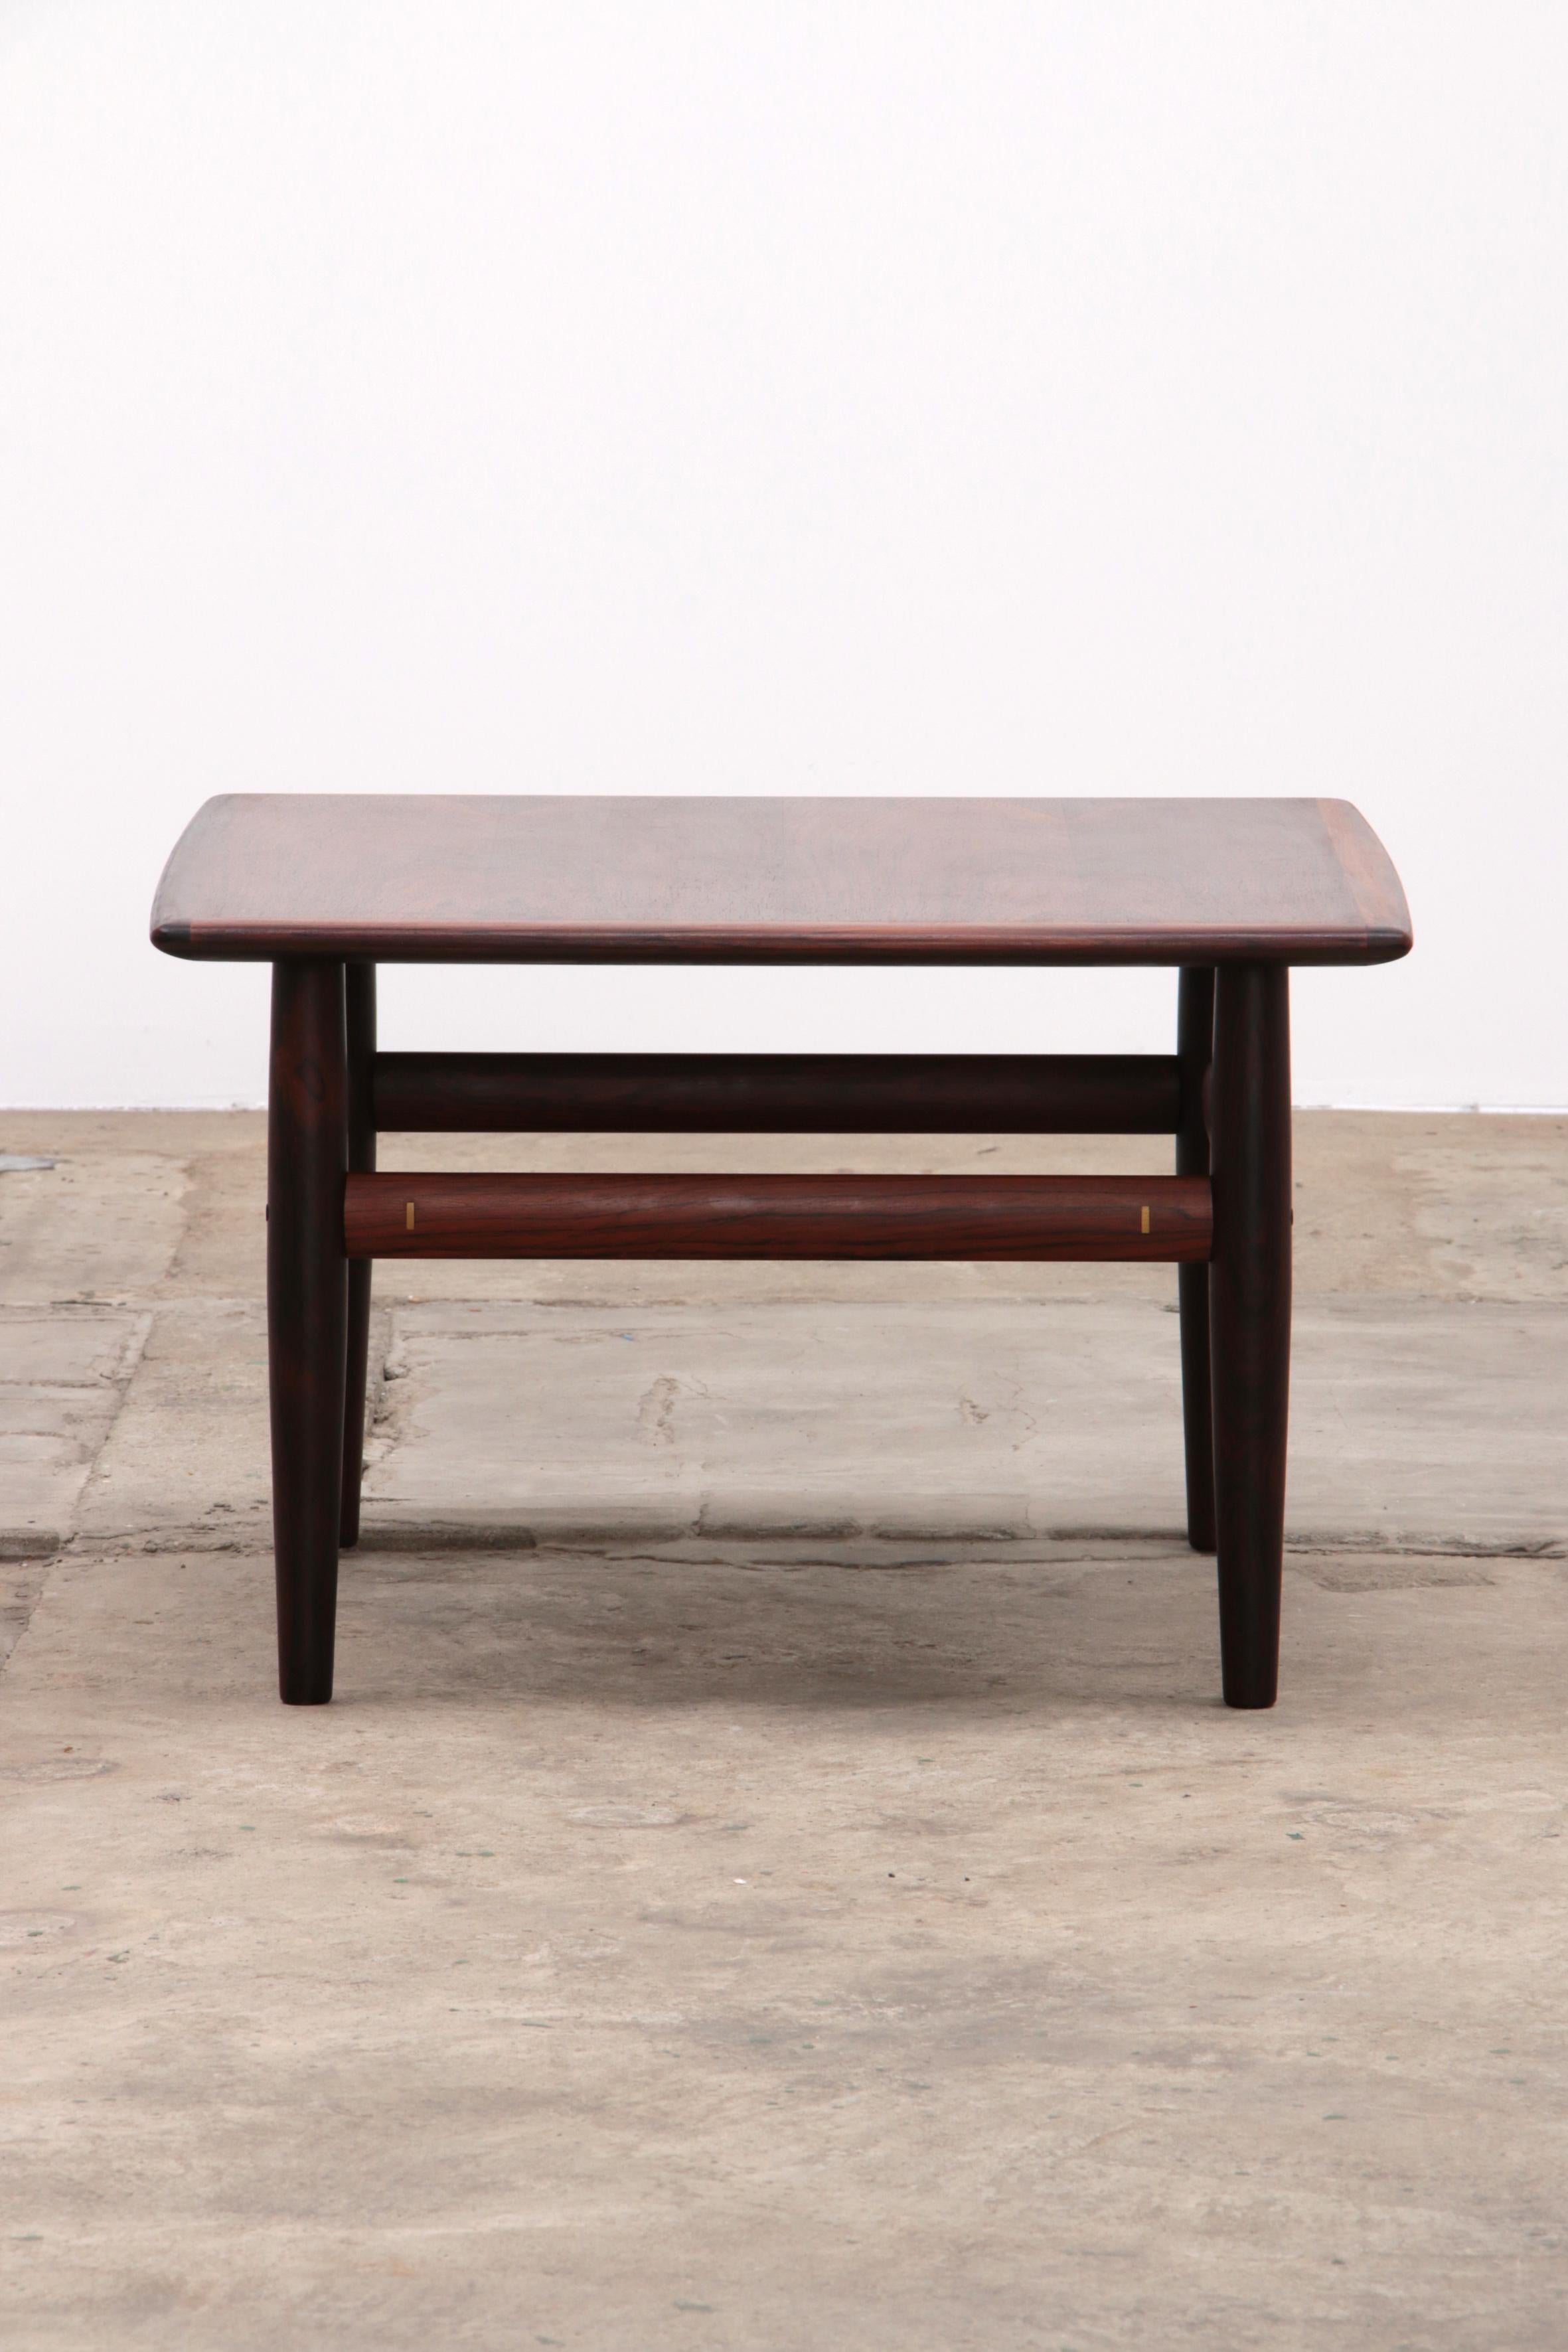 Danish Rosewood Coffee Table by Grete Jalk for Glostrup, 1968 Denmark. For Sale